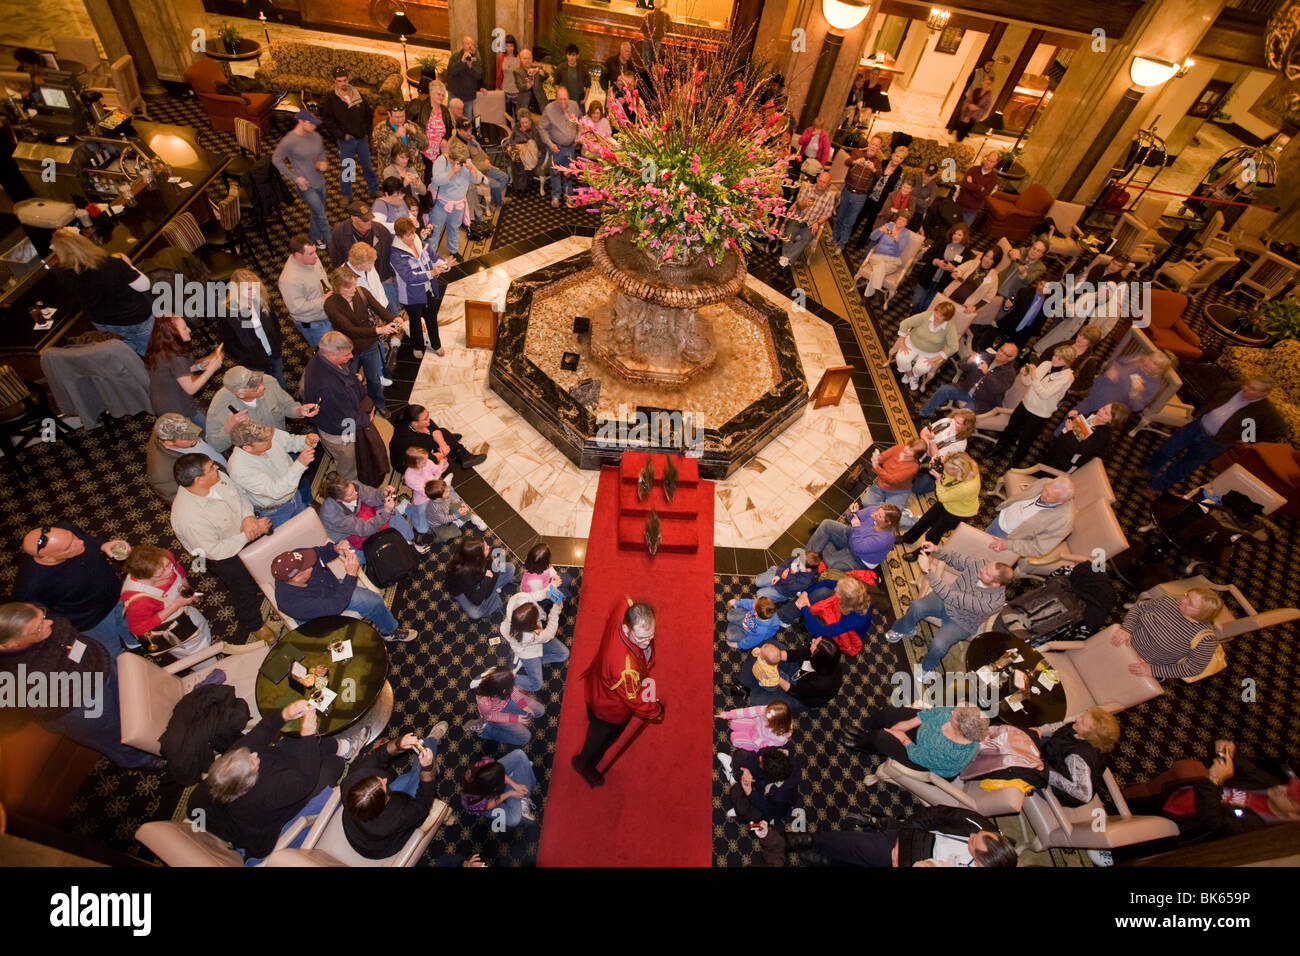 Daily parade of ducks through lobby of Peabody Hotel in Memphis, Tennessee Stock Photo